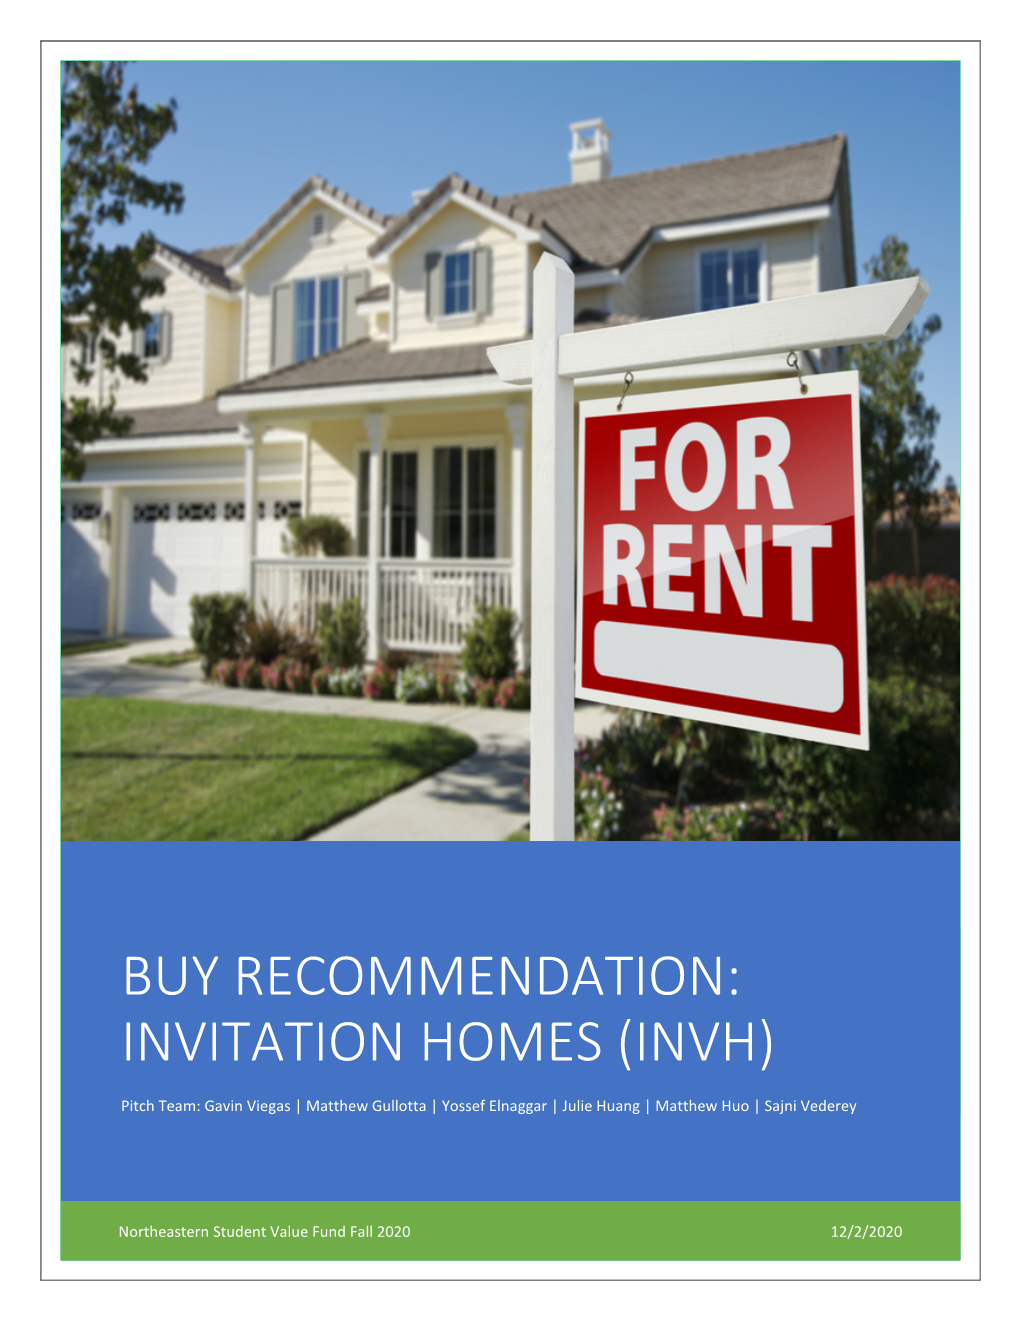 Buy Recommendation: Invitation Homes (Invh)